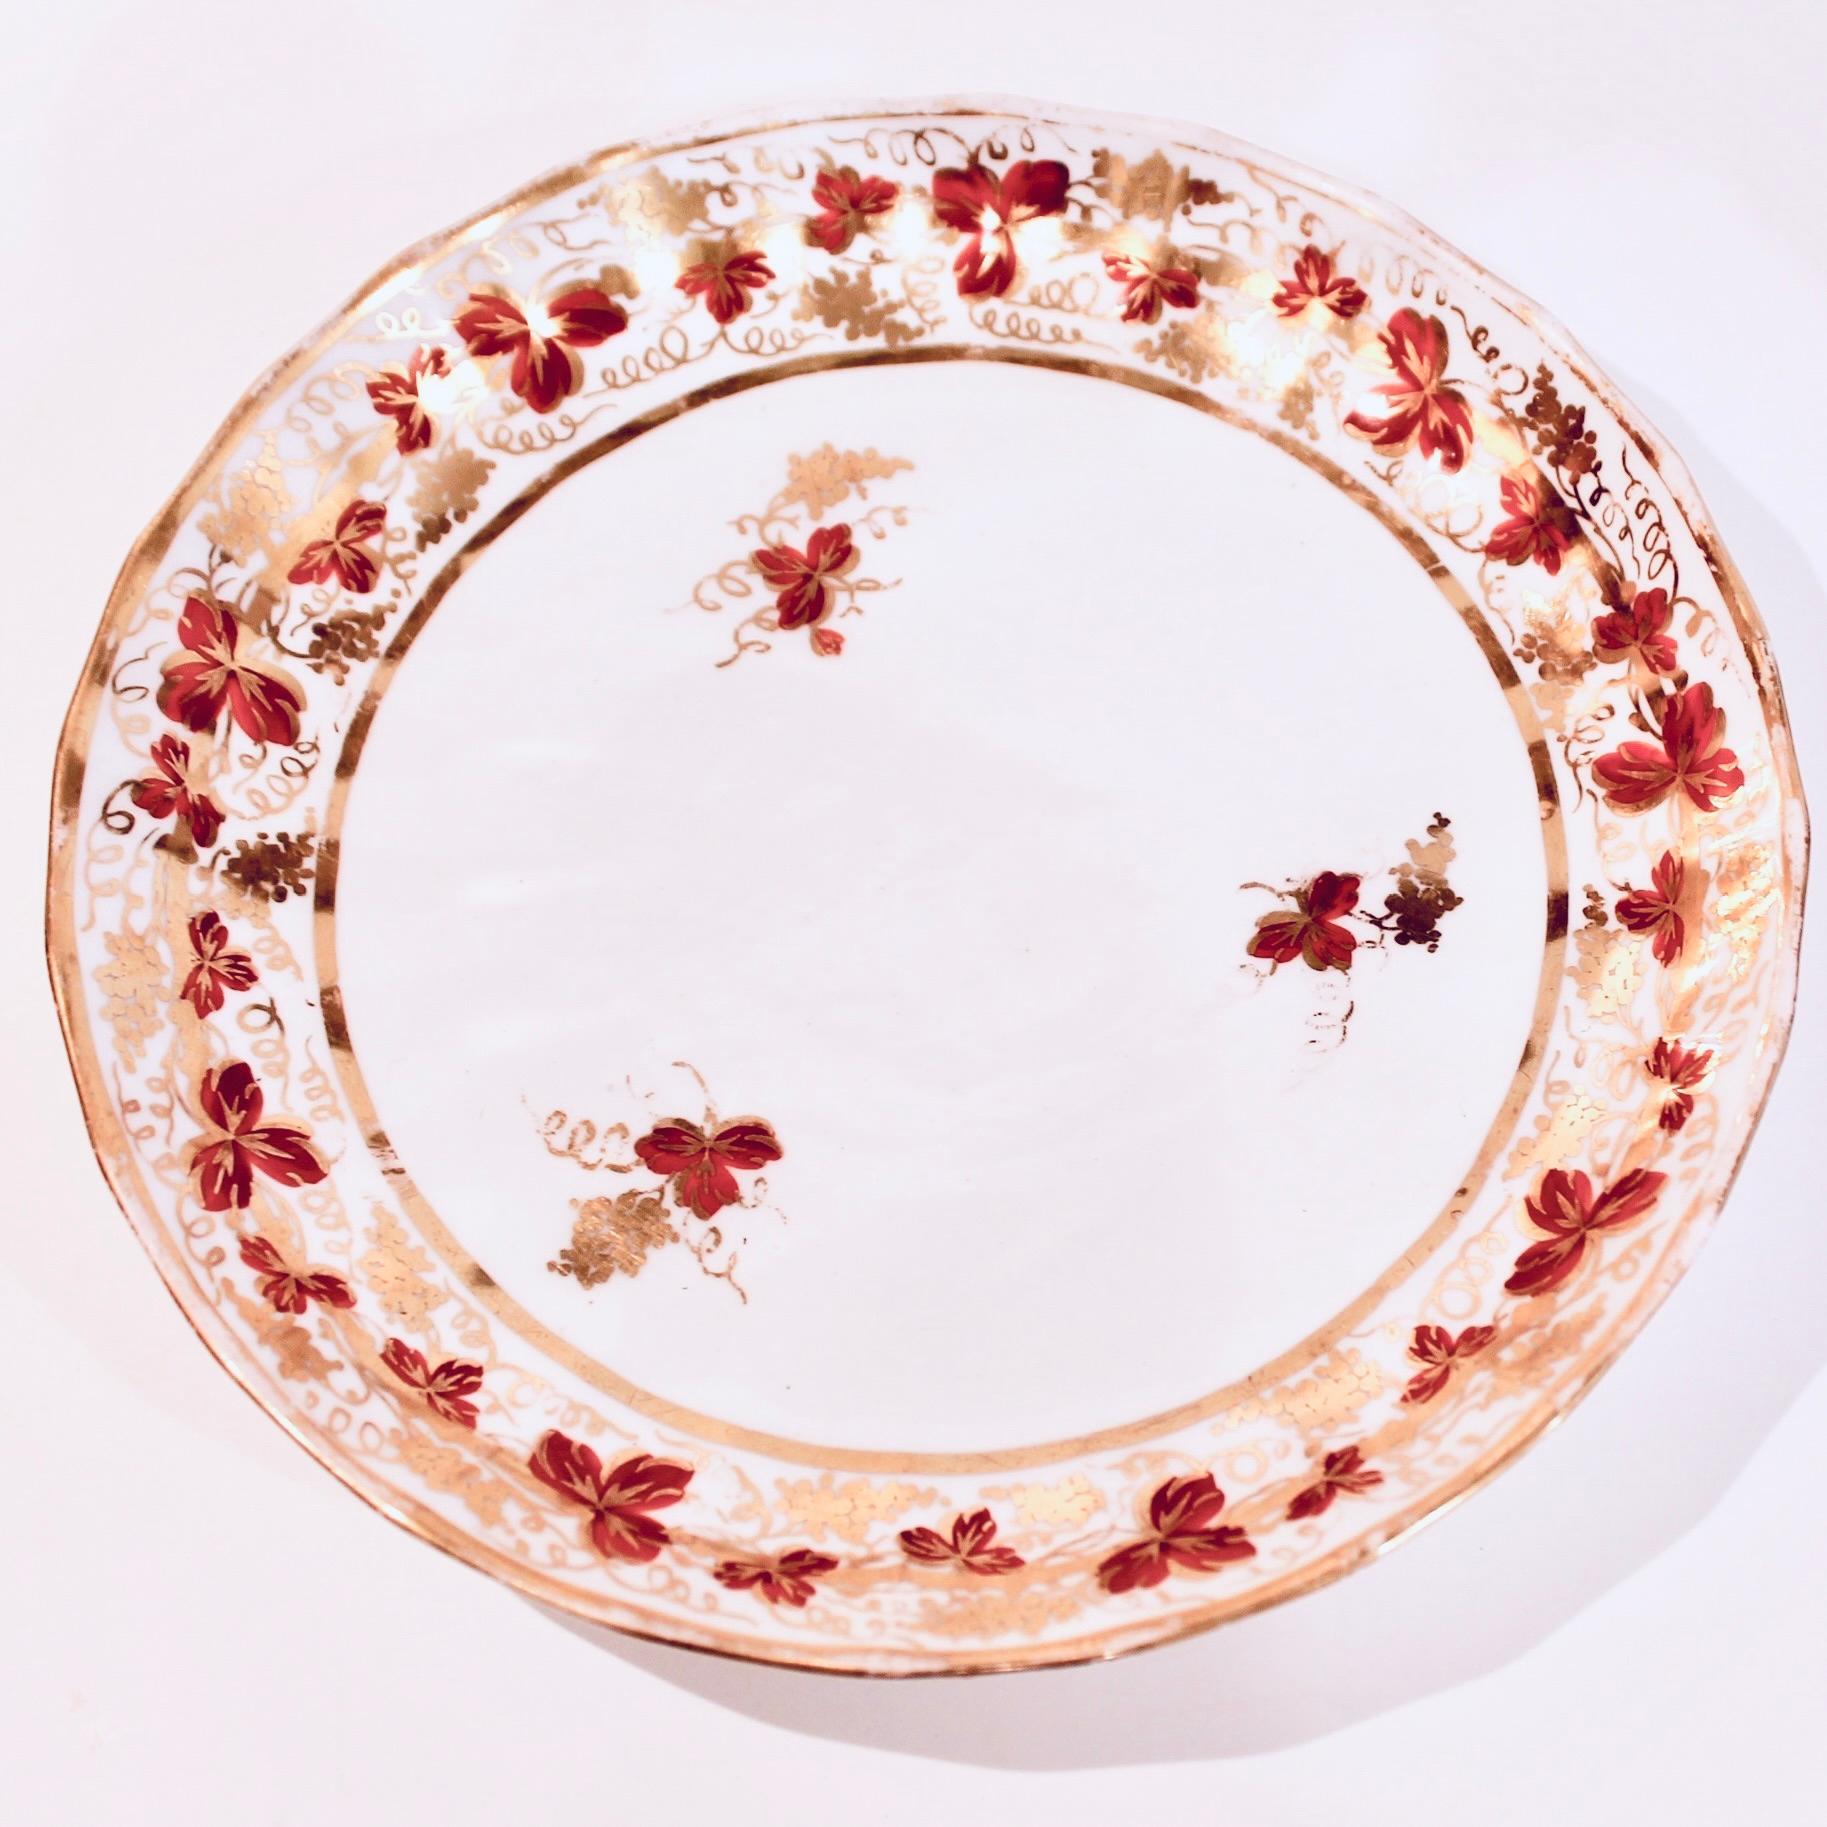 A fine pair of fine fluted red oxide and gilt decorated plates in a classic Derby pattern: a lively and dense yet delicate grapevine border. Light wear, rubbing to the gilding: slight on one, more noticeable on the other. Both with handpainted Derby